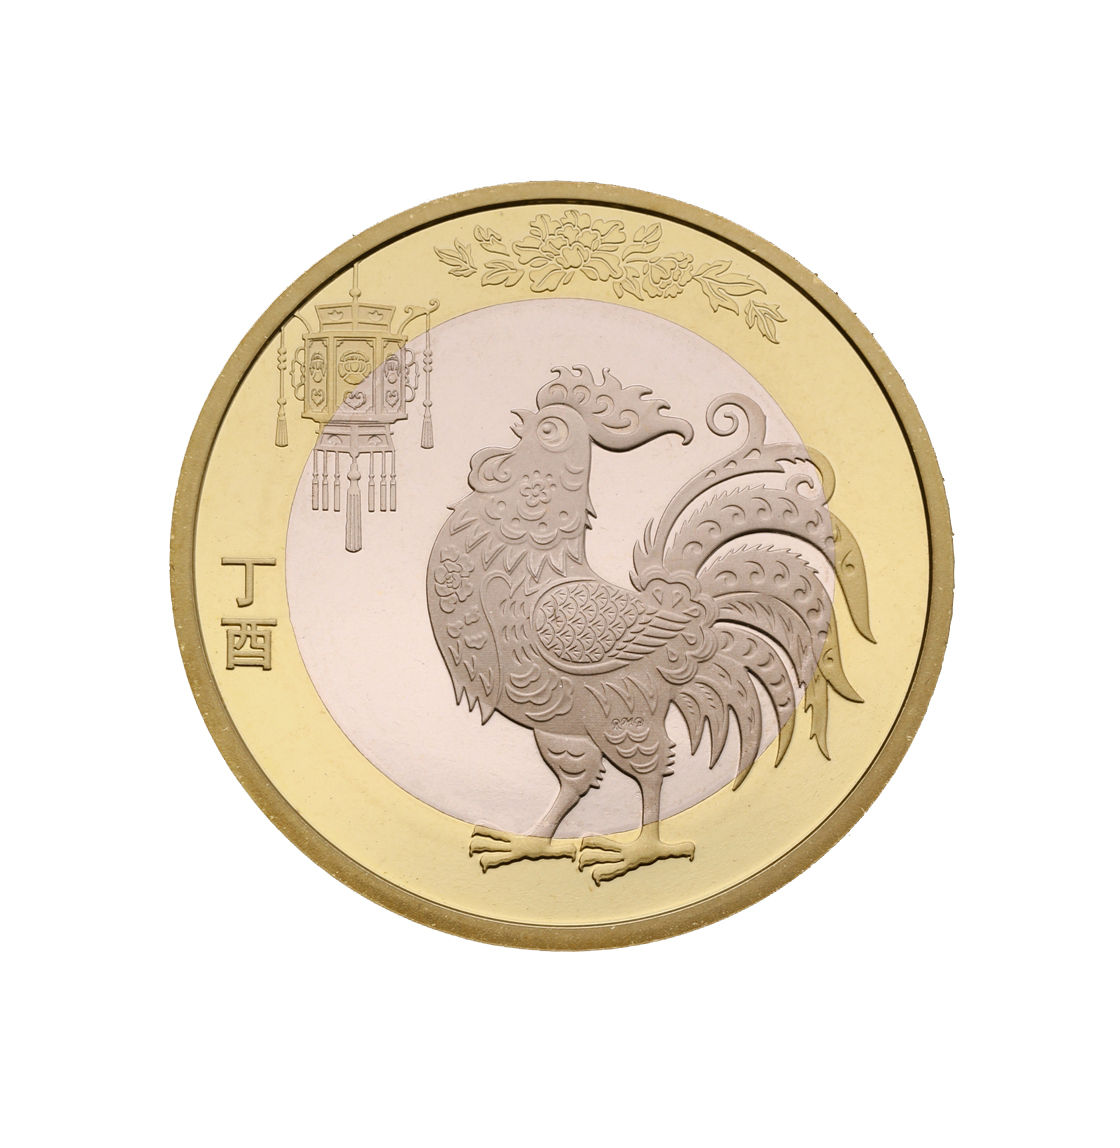 2017 Lunar New Year Year of the Rooster commemorative coins